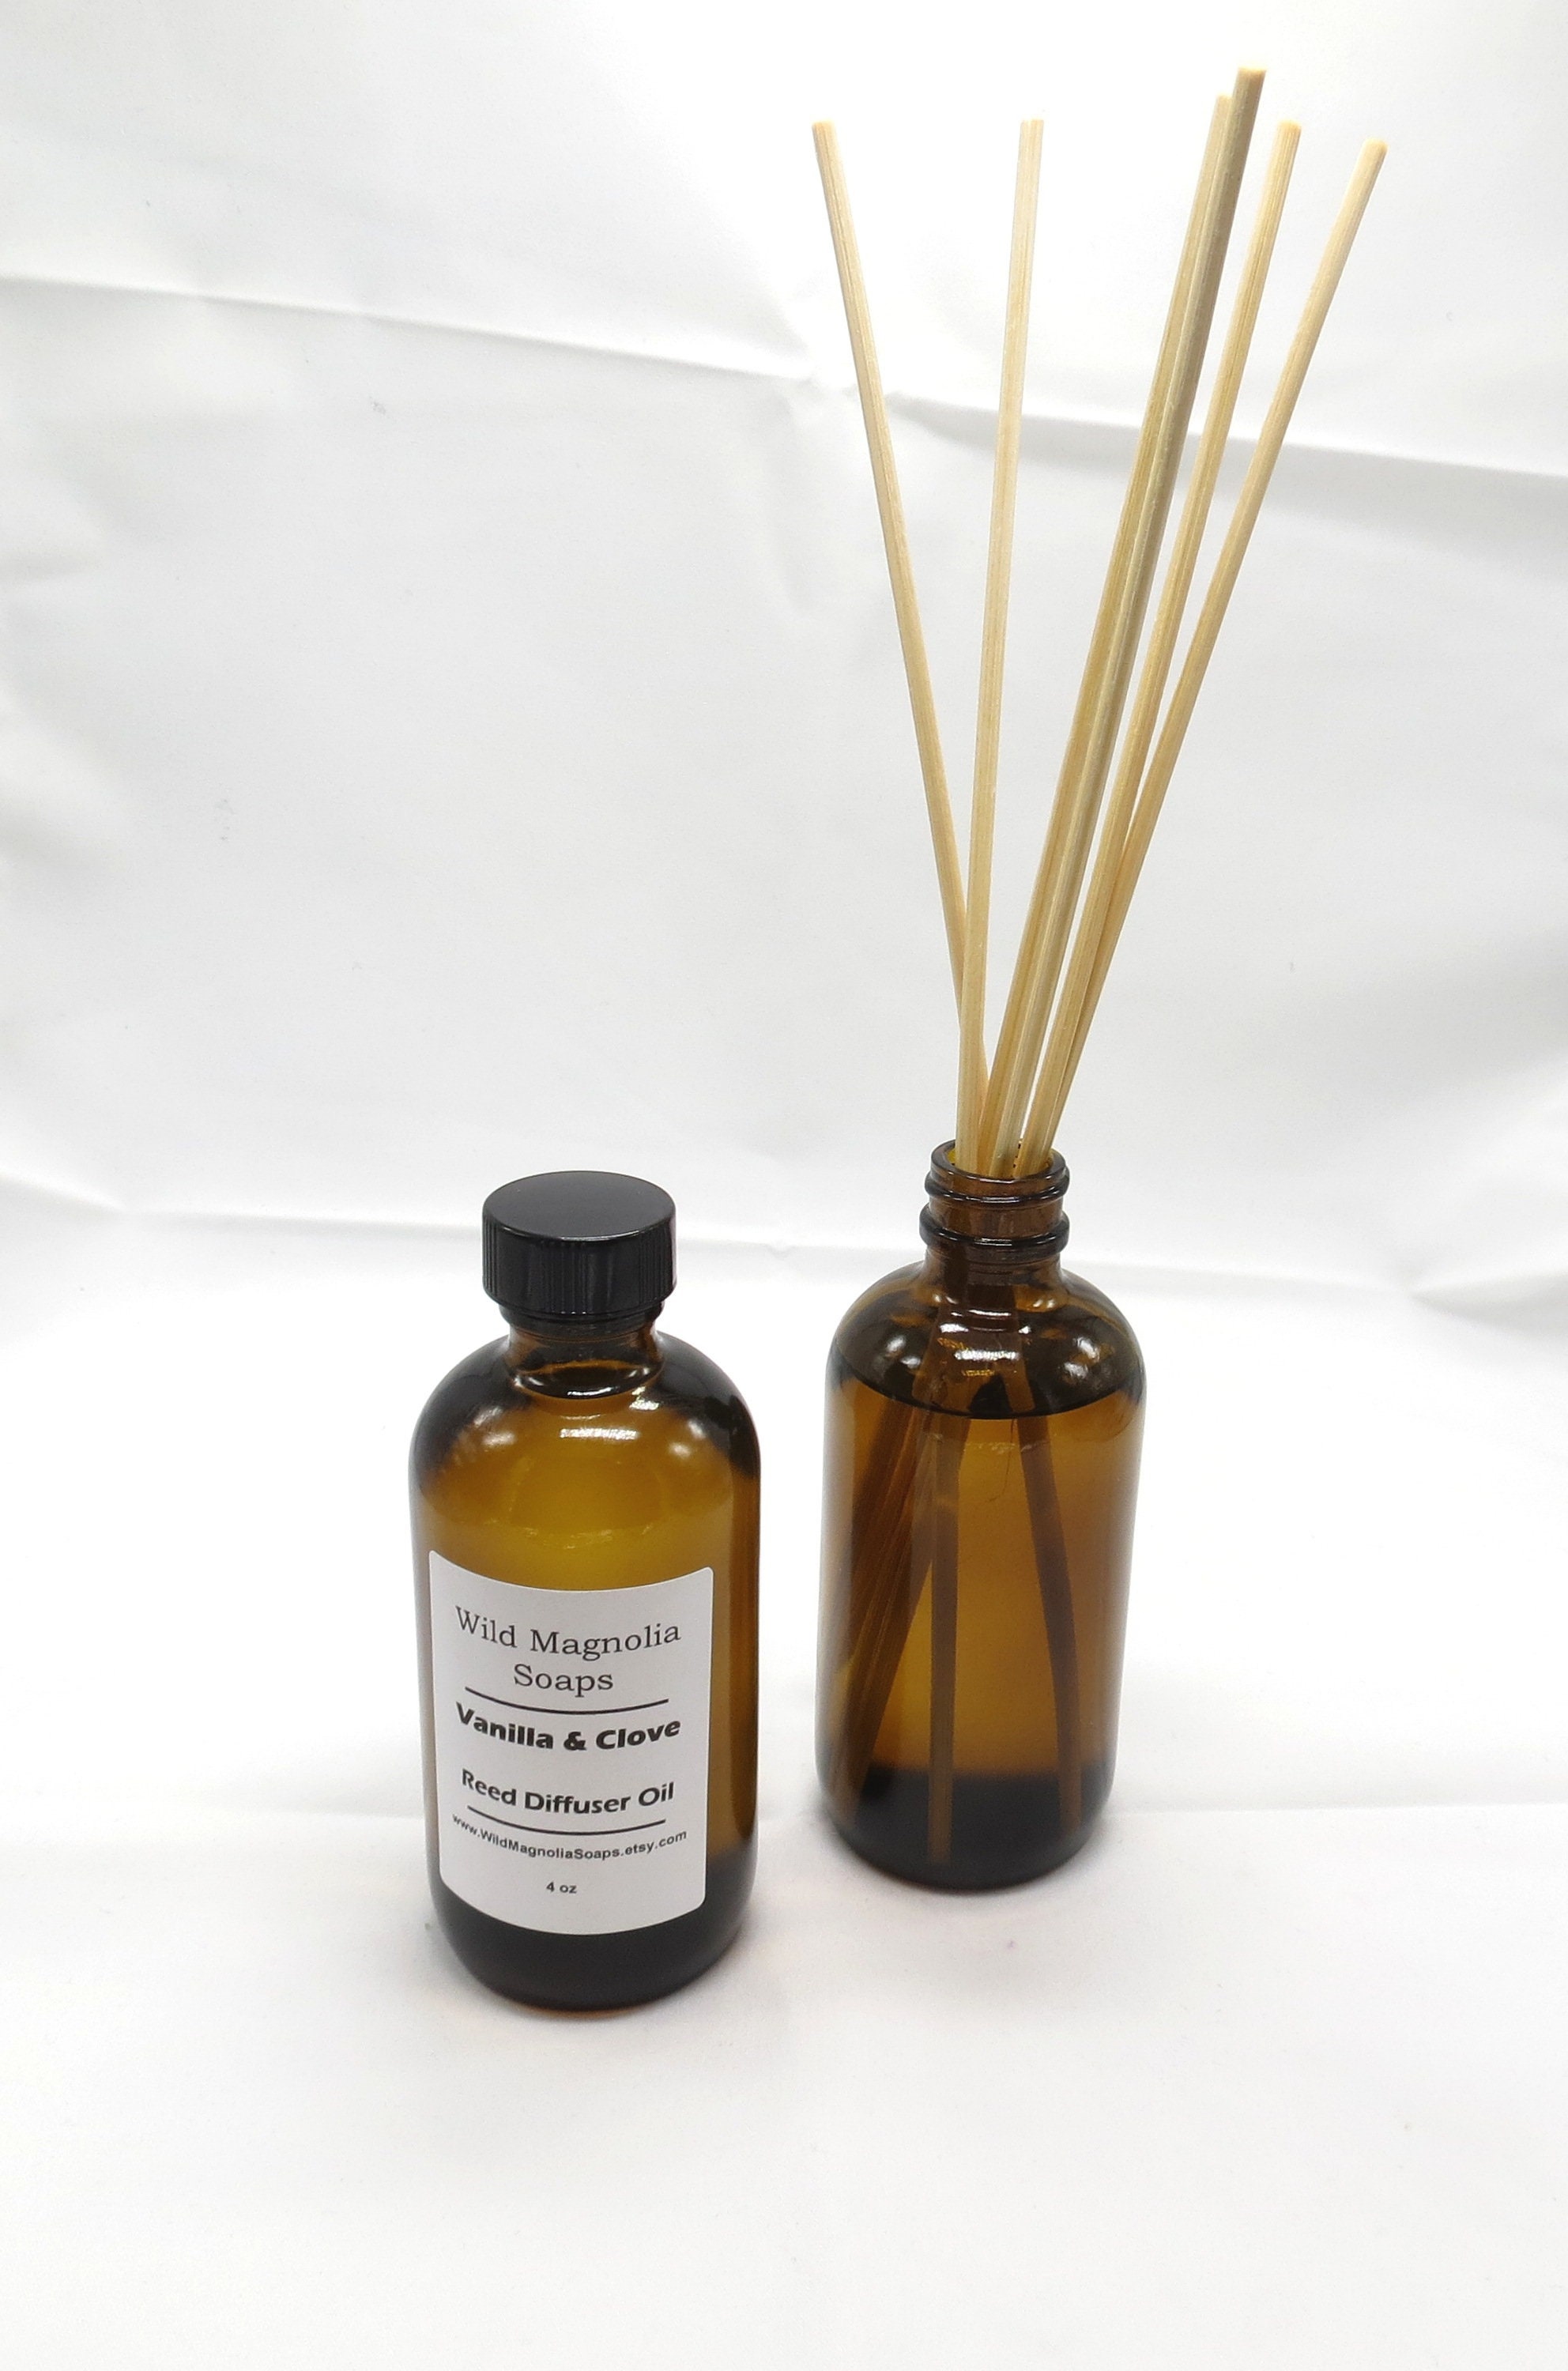 Vanilla and Clove Scented Reed Diffuser Refill with Reeds 4 oz | Etsy